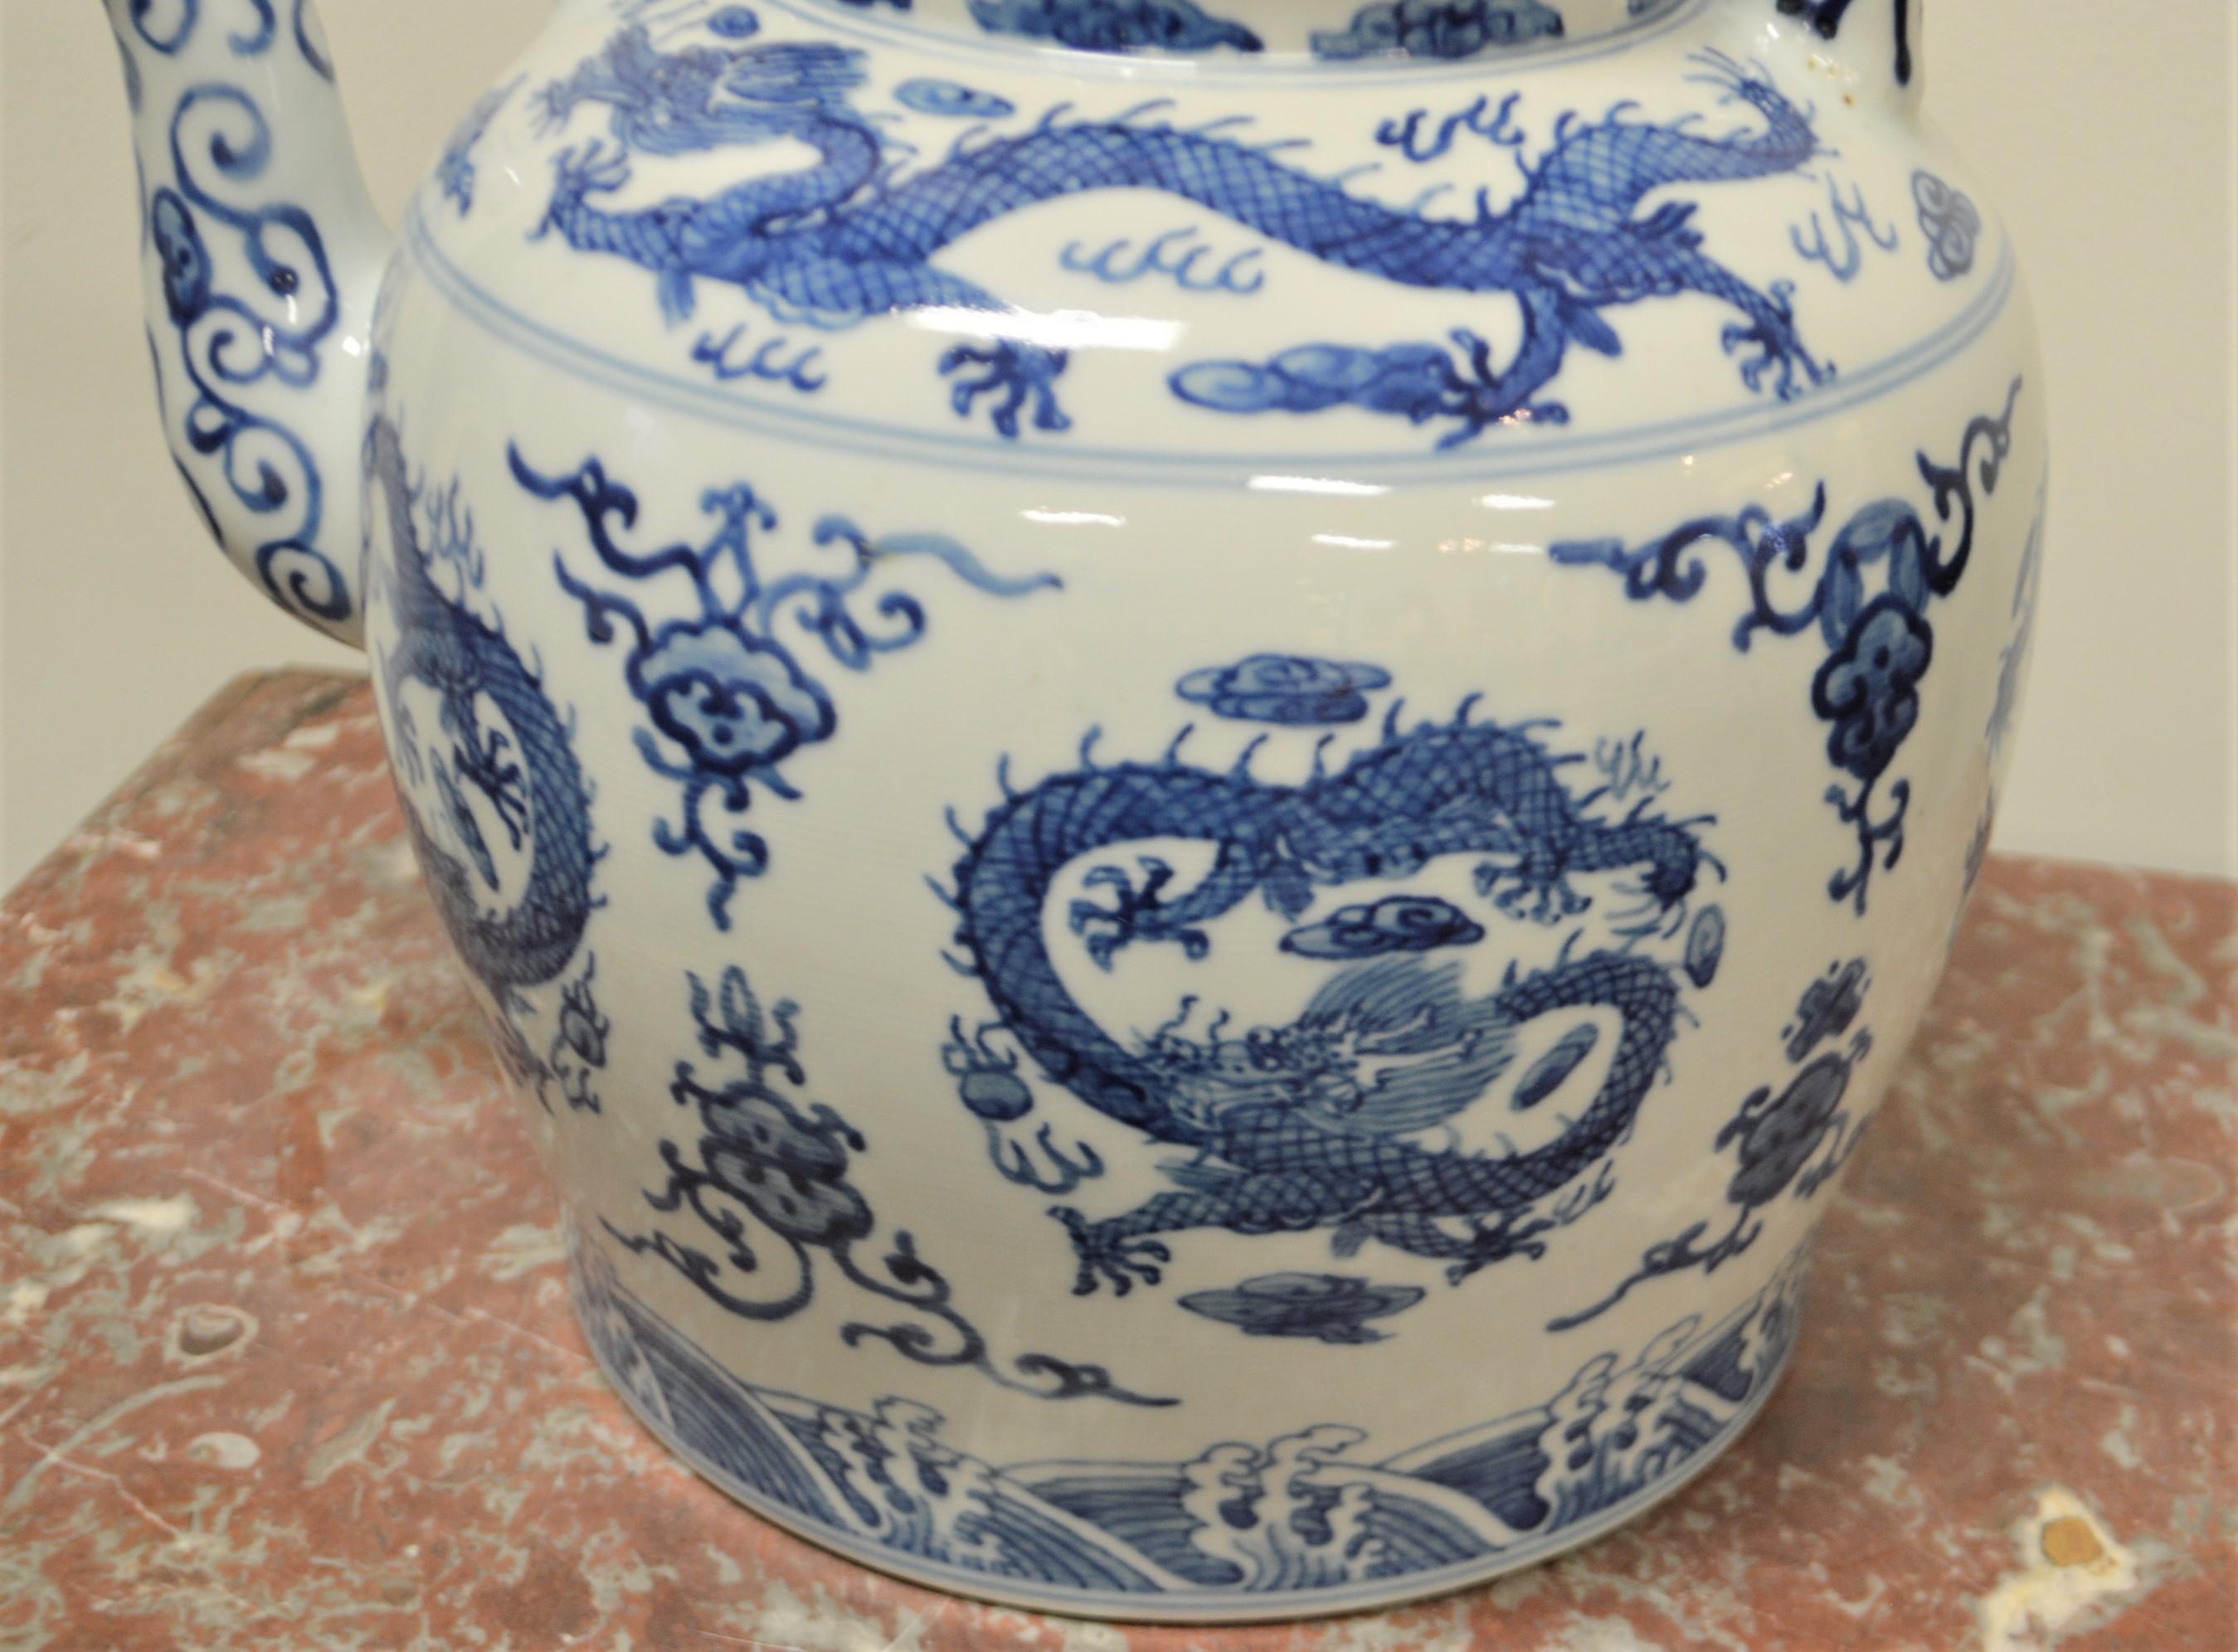 Painted Large Blue and White Decorative Chinese Porcelain Tea Pot with Dragon Design